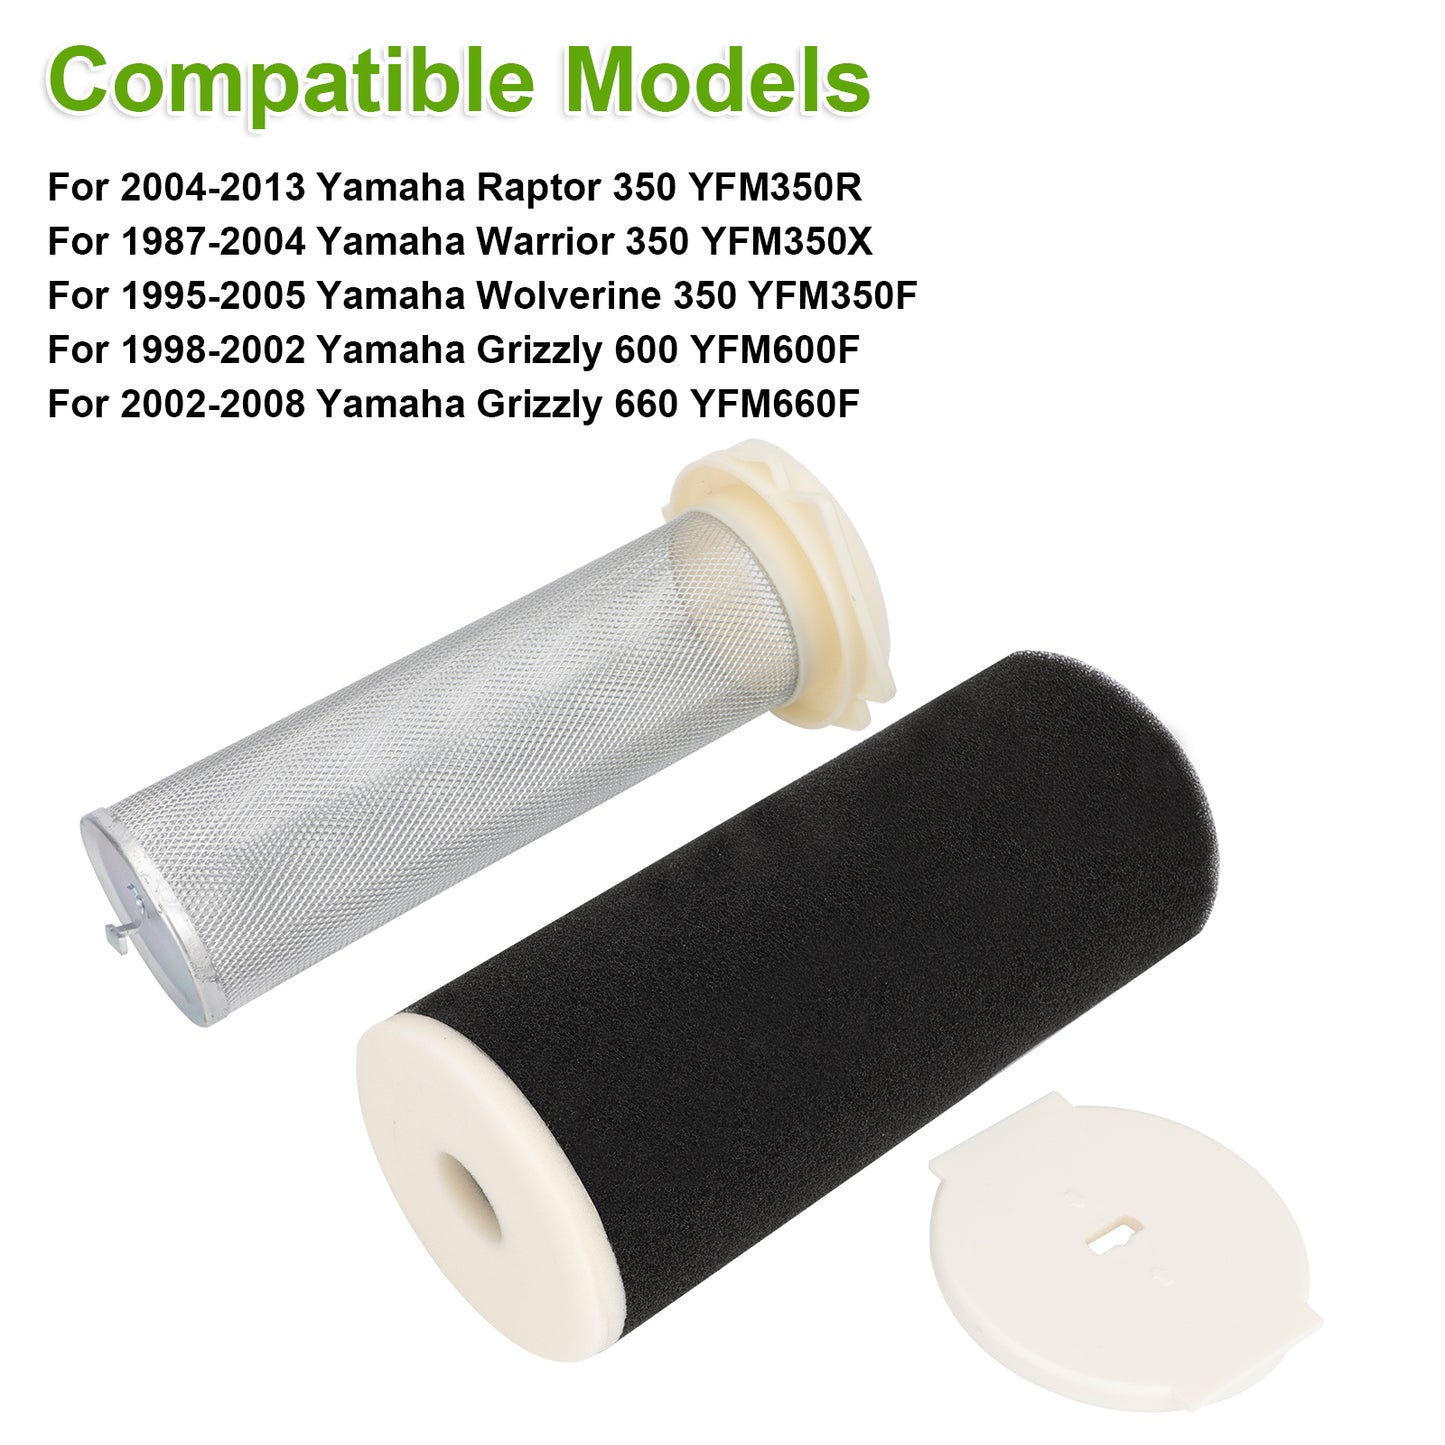 Durable Air Filter Kit - Premium Quality for Yamaha Raptor, Warrior, Wolverine, and Grizzly Models